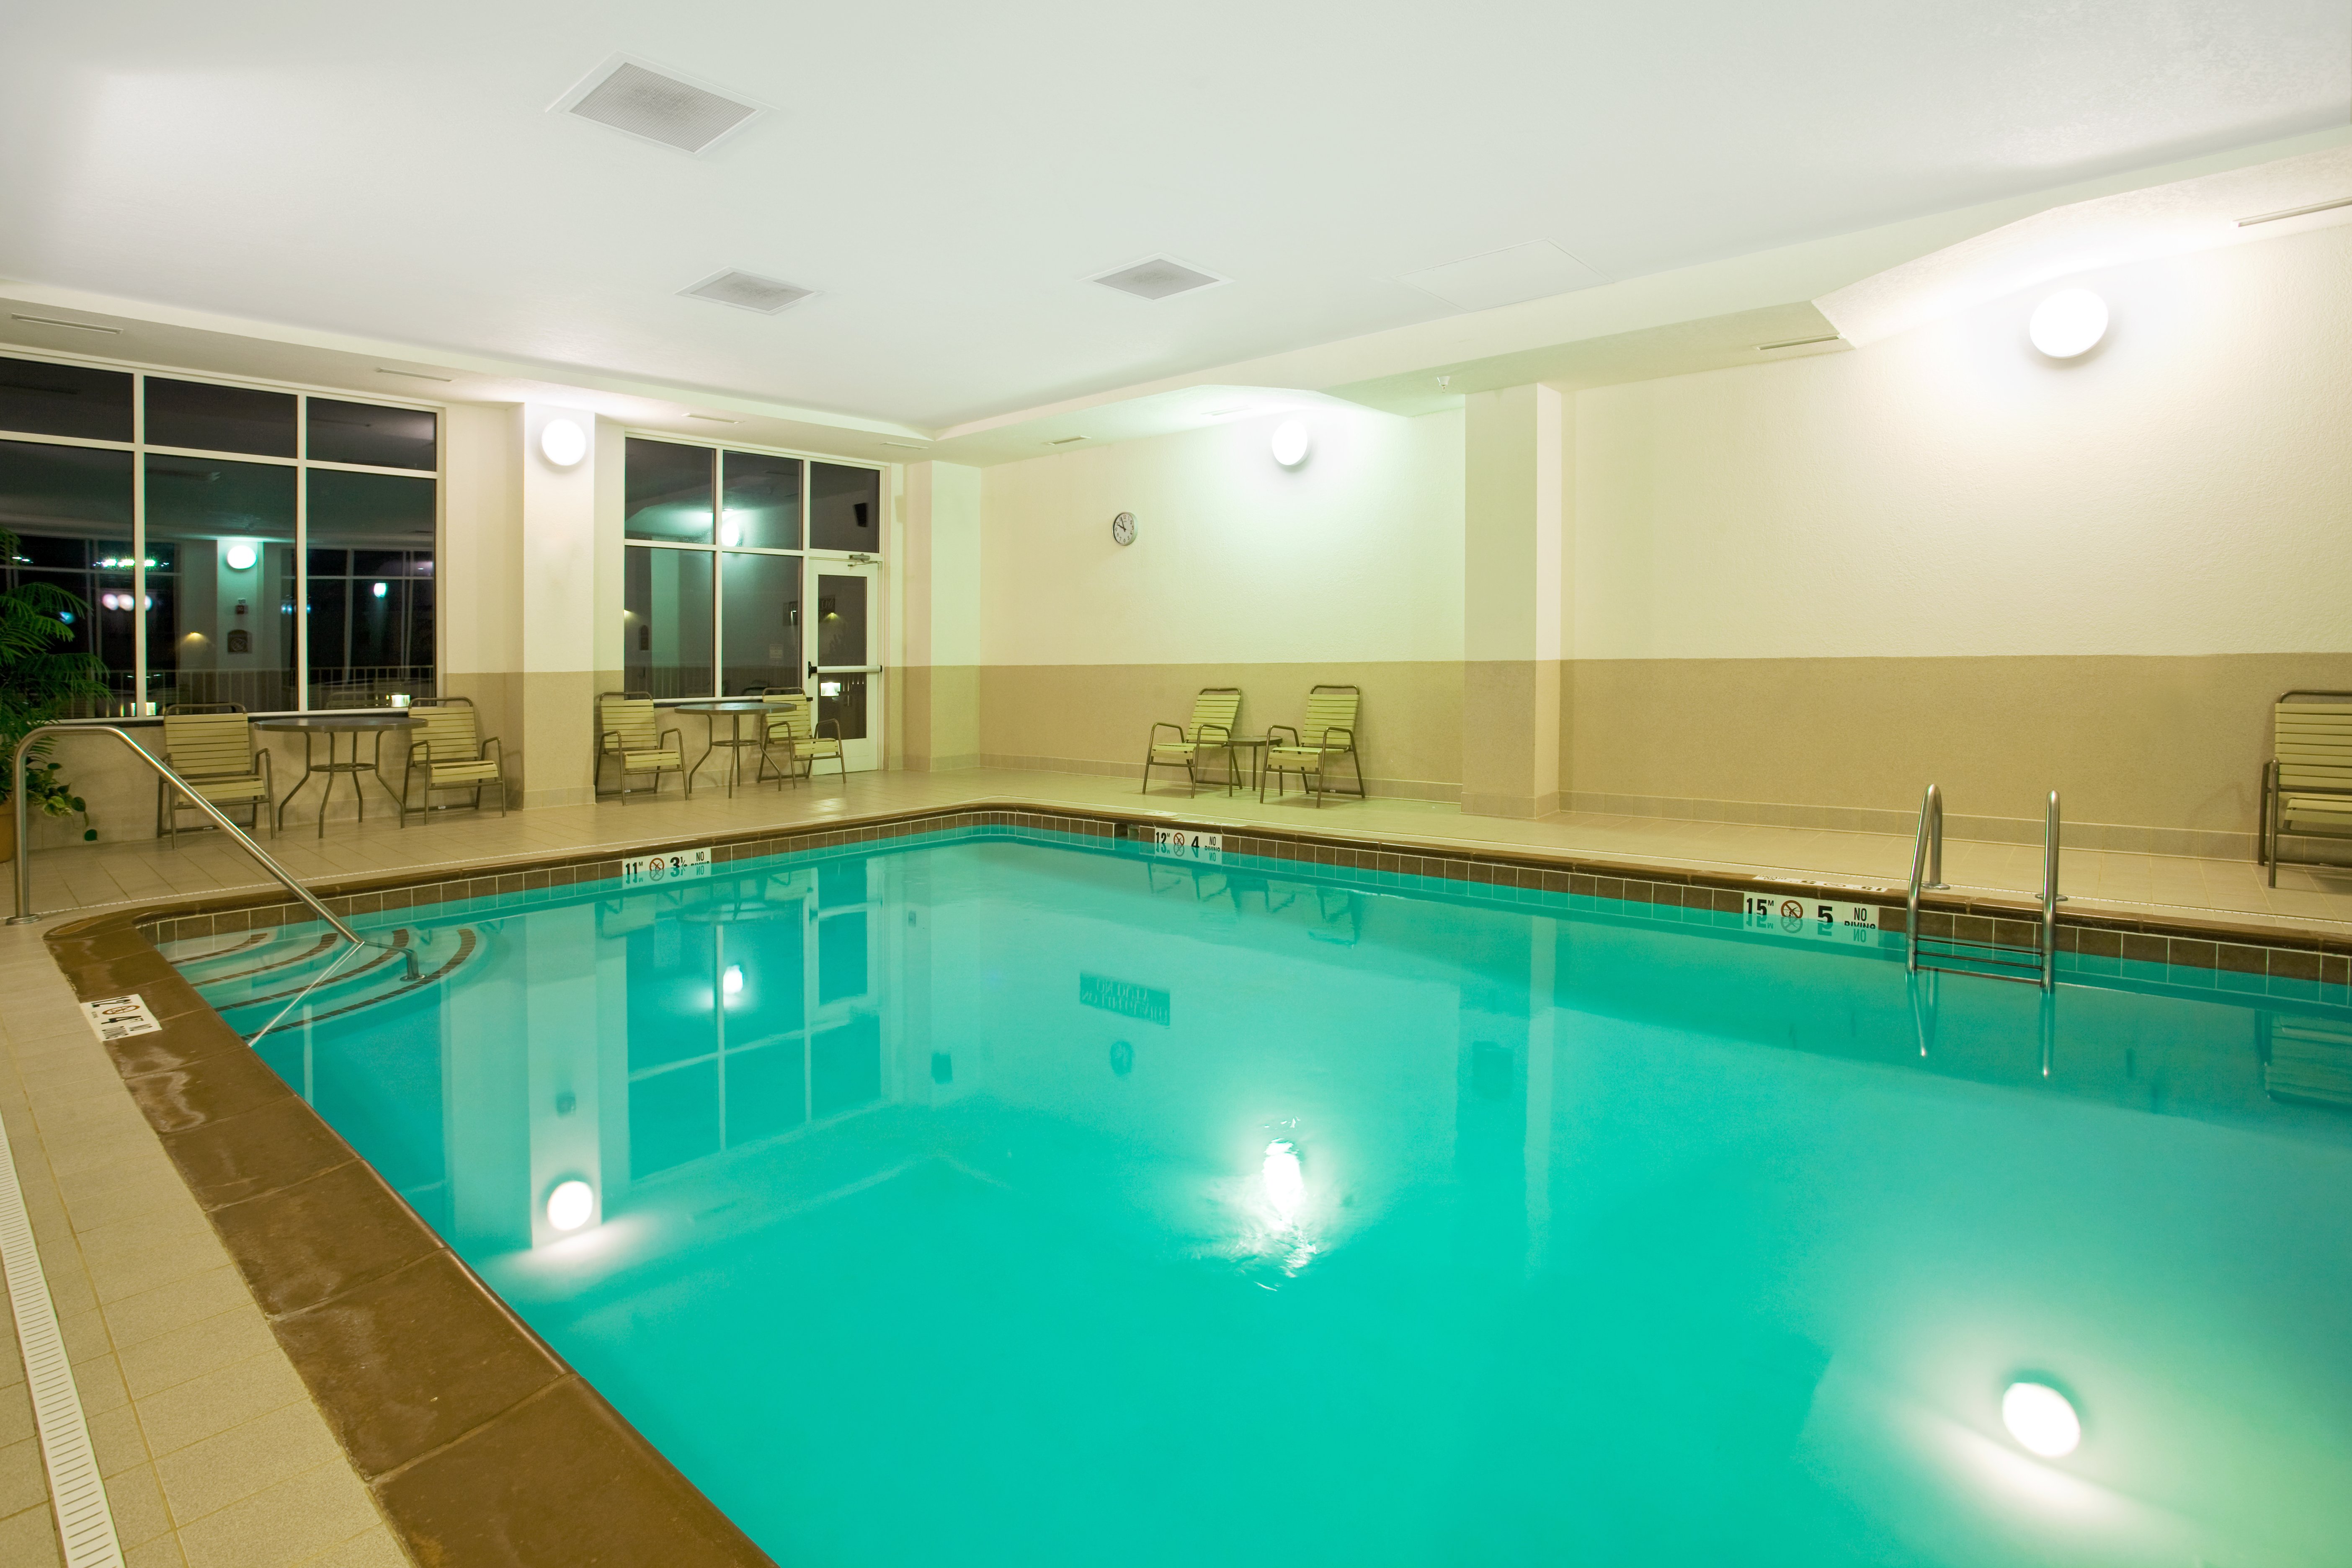 Have a morning or afternoon dip in our heated indoor pool.